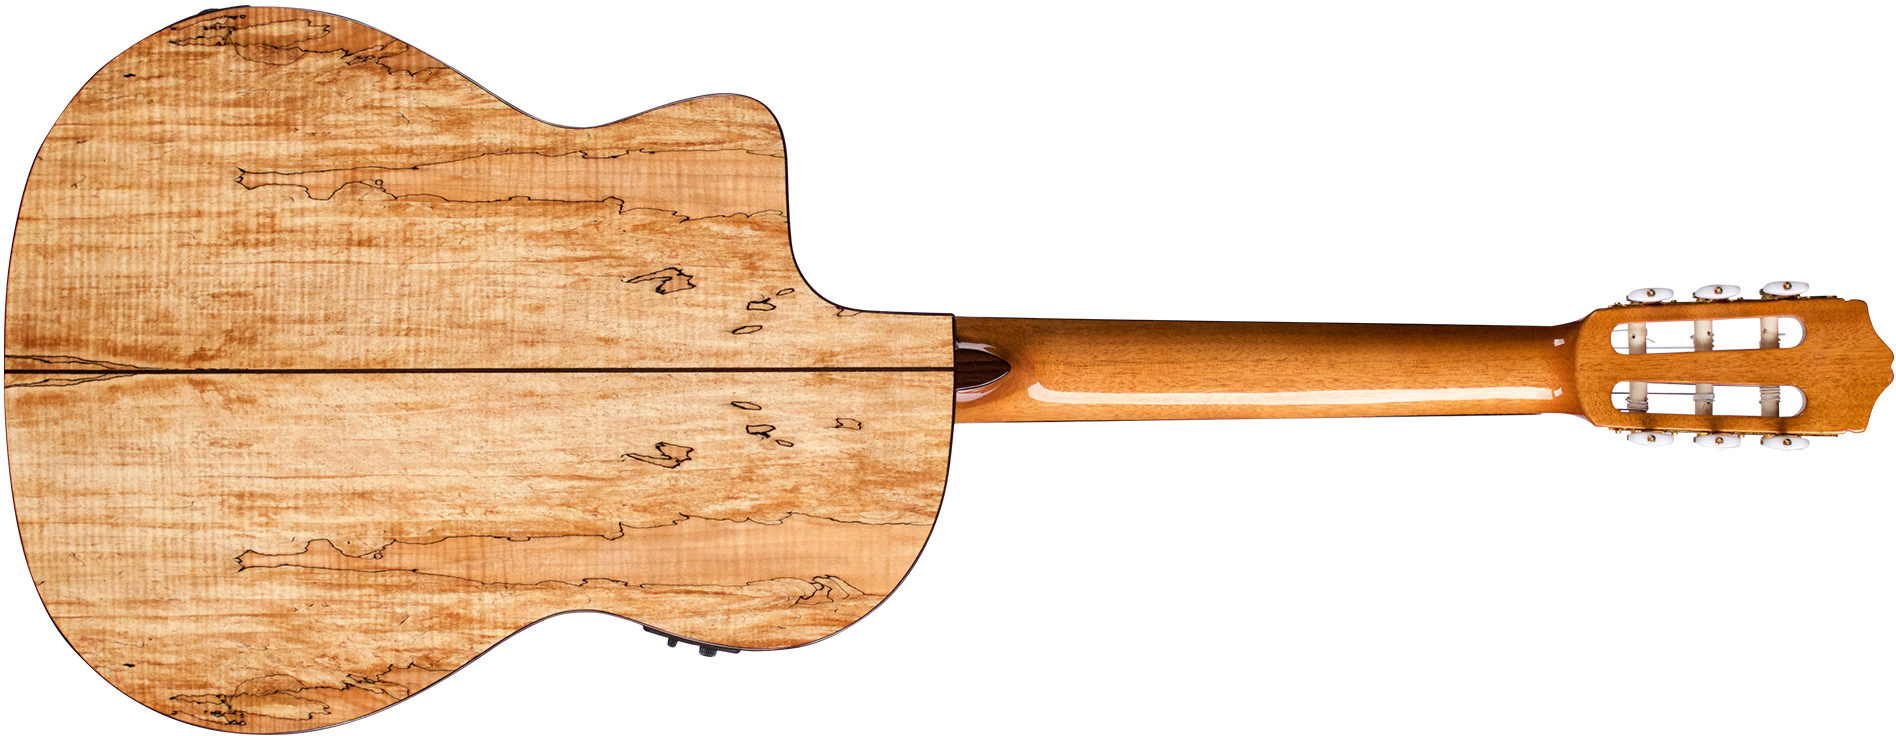 Cordoba C5 Cet Spalted Maple Limited Thinbody Cw Epicea Erable Pf - Natural - Guitarra clásica 4/4 - Variation 1